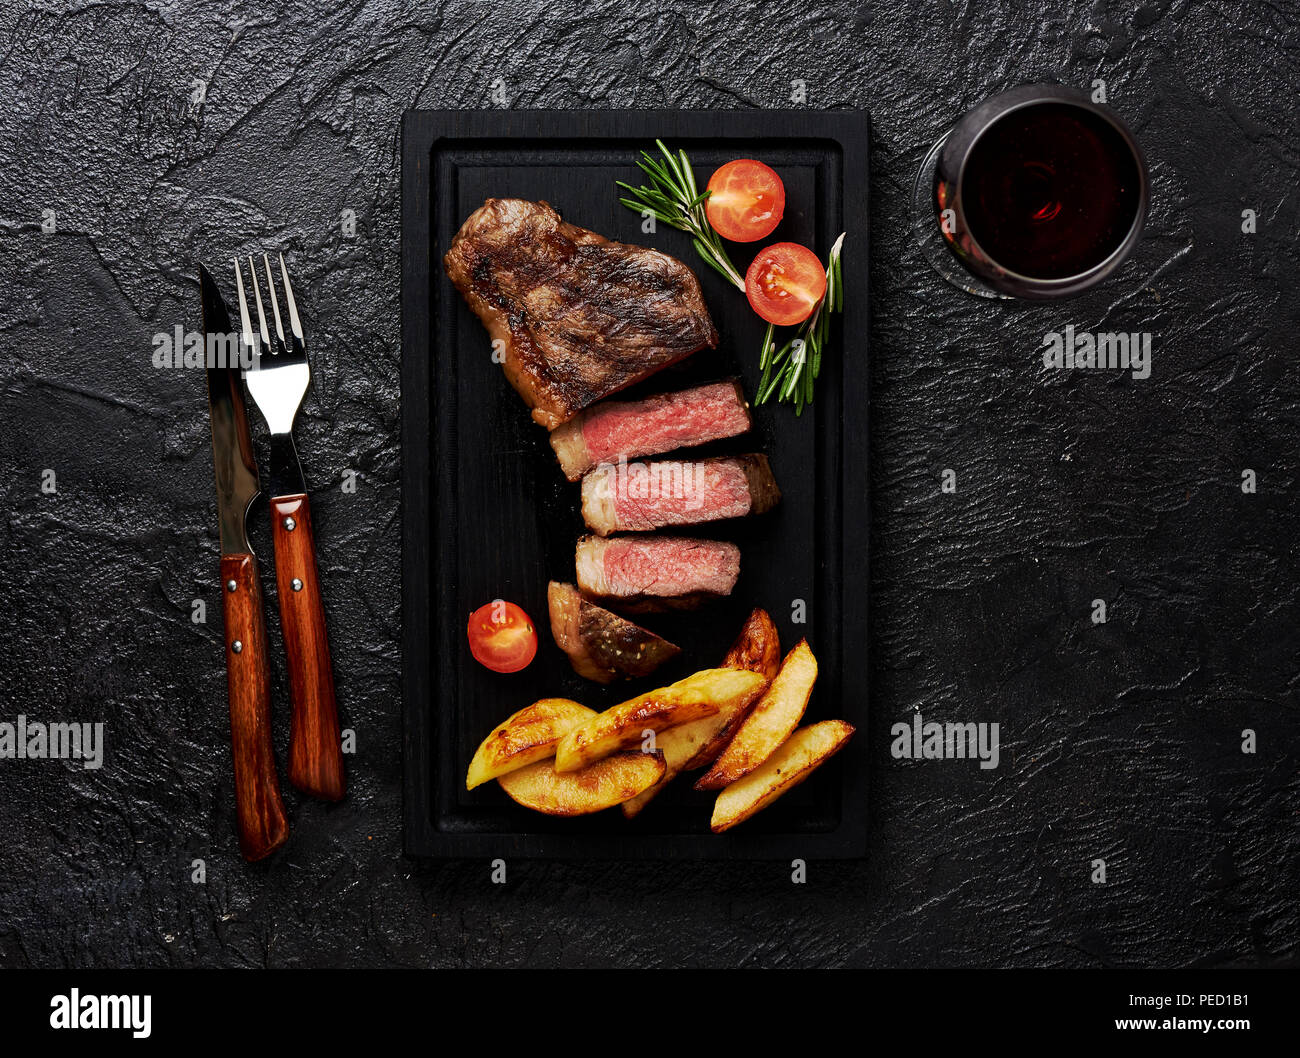 Meat Picanha steak, traditional Brazilian cut with tomatoes, potato wedges and rosemary on black meat cutting board. Steak and a glass of red wine with fork and knife. Black concrete background. Stock Photo